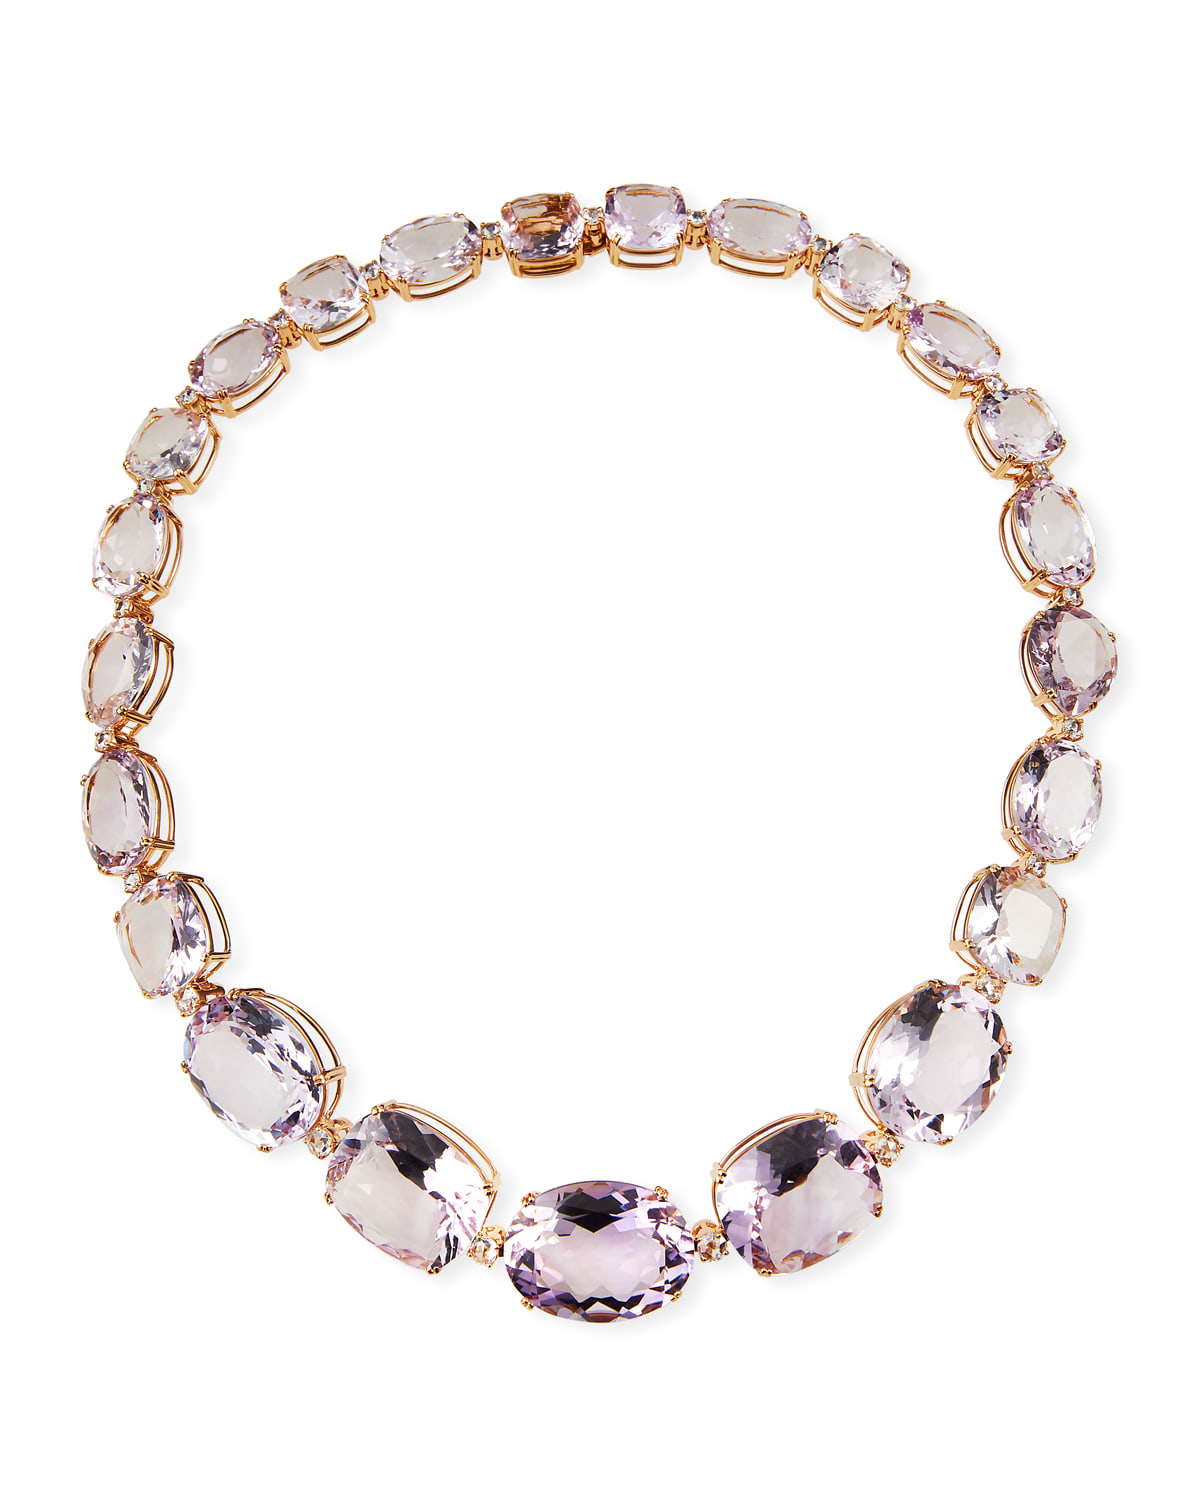 Etho Maria 18k Pink Gold Graduated Amethyst Necklace